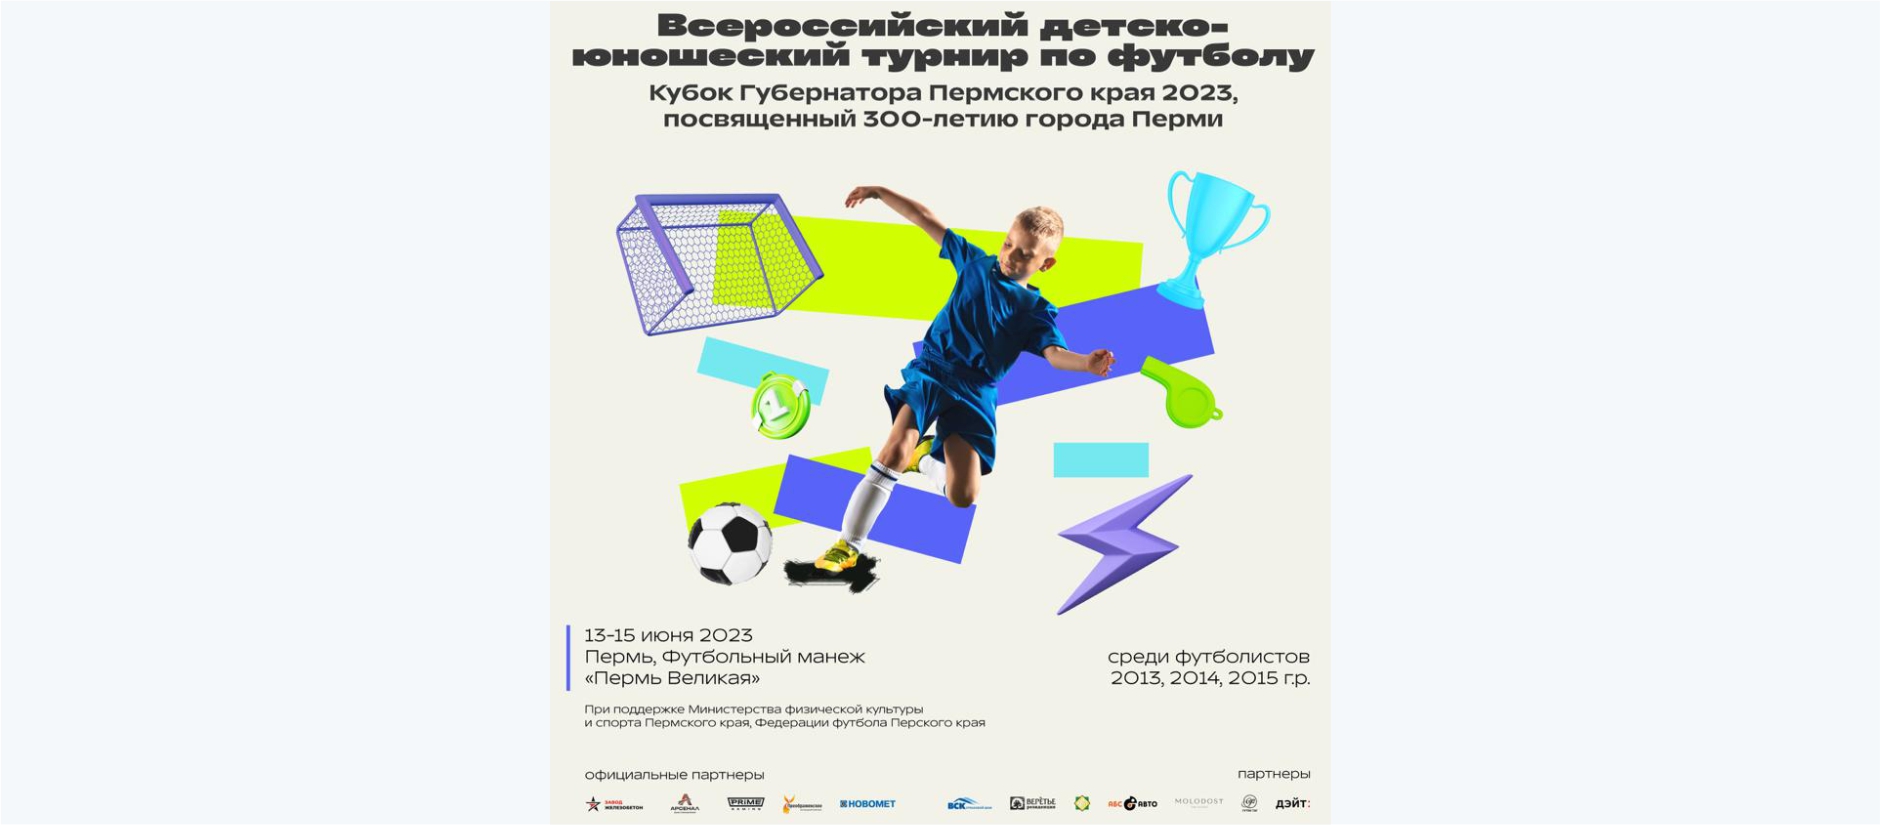 NNIAT is the official partner of the All-Russian youth football tournament "Cup of the Governor of the Perm Territory-2023"